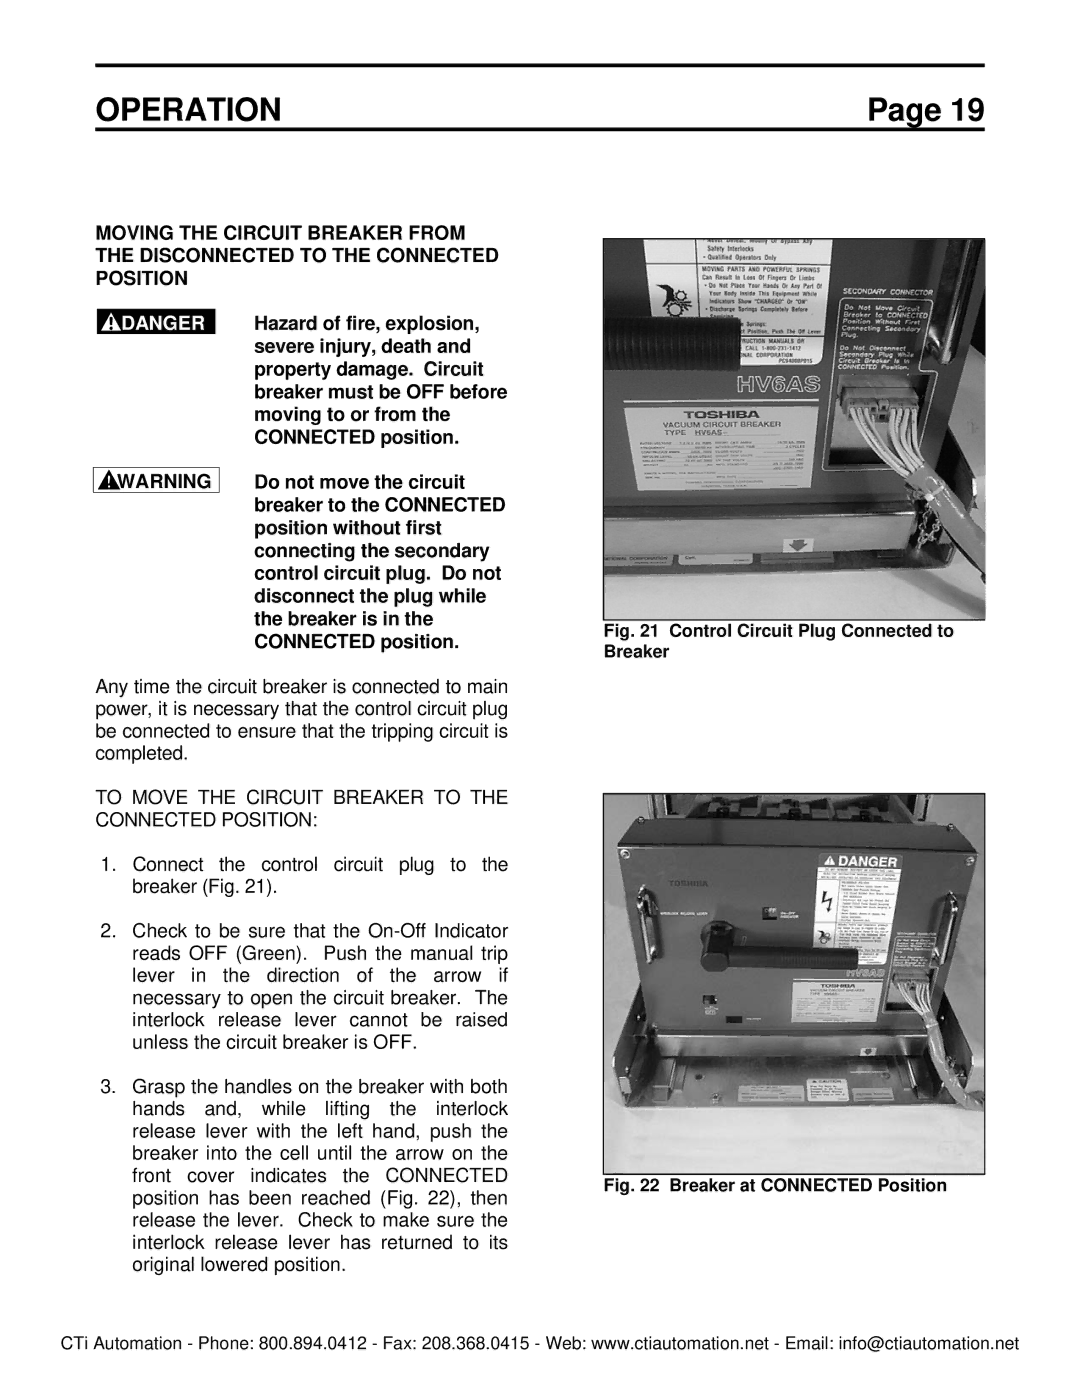 Toshiba HV6FS-MLD instruction manual Operation, To Move the Circuit Breaker to the Connected Position 